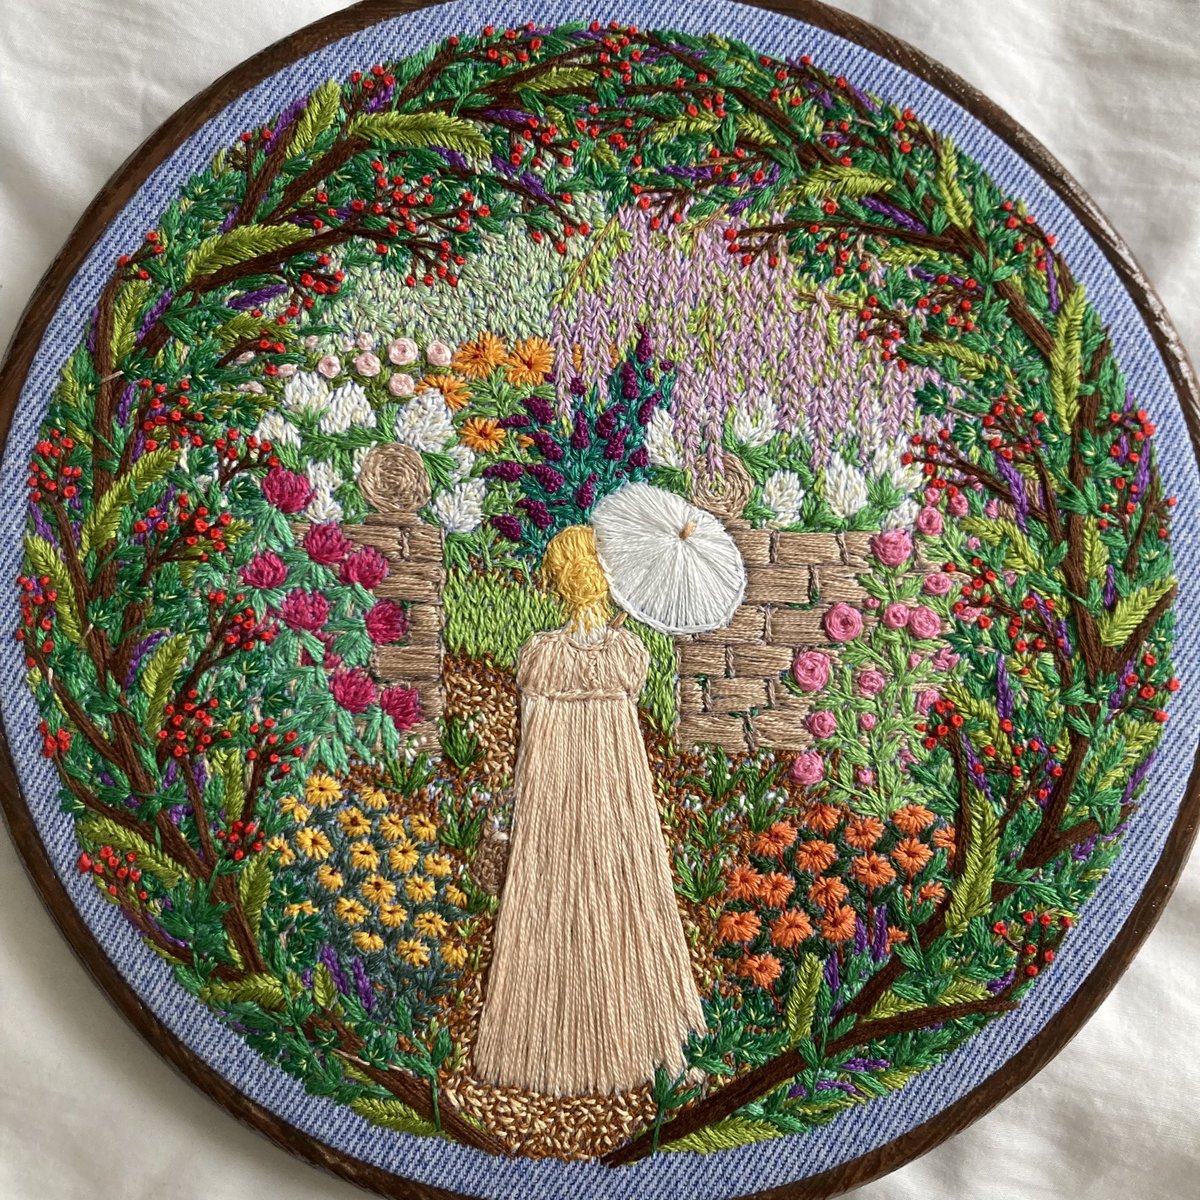 Well here it is and what seems like a million hours of stitching, I give you my latest embroidery… inspired by literature, this one is my take on Jane Austen’s, Emma. 😊🧵🪡🌿📚🌺 *completely freehand stitched without patterns, paint or guides. #stitchedart #thesewingsongbird